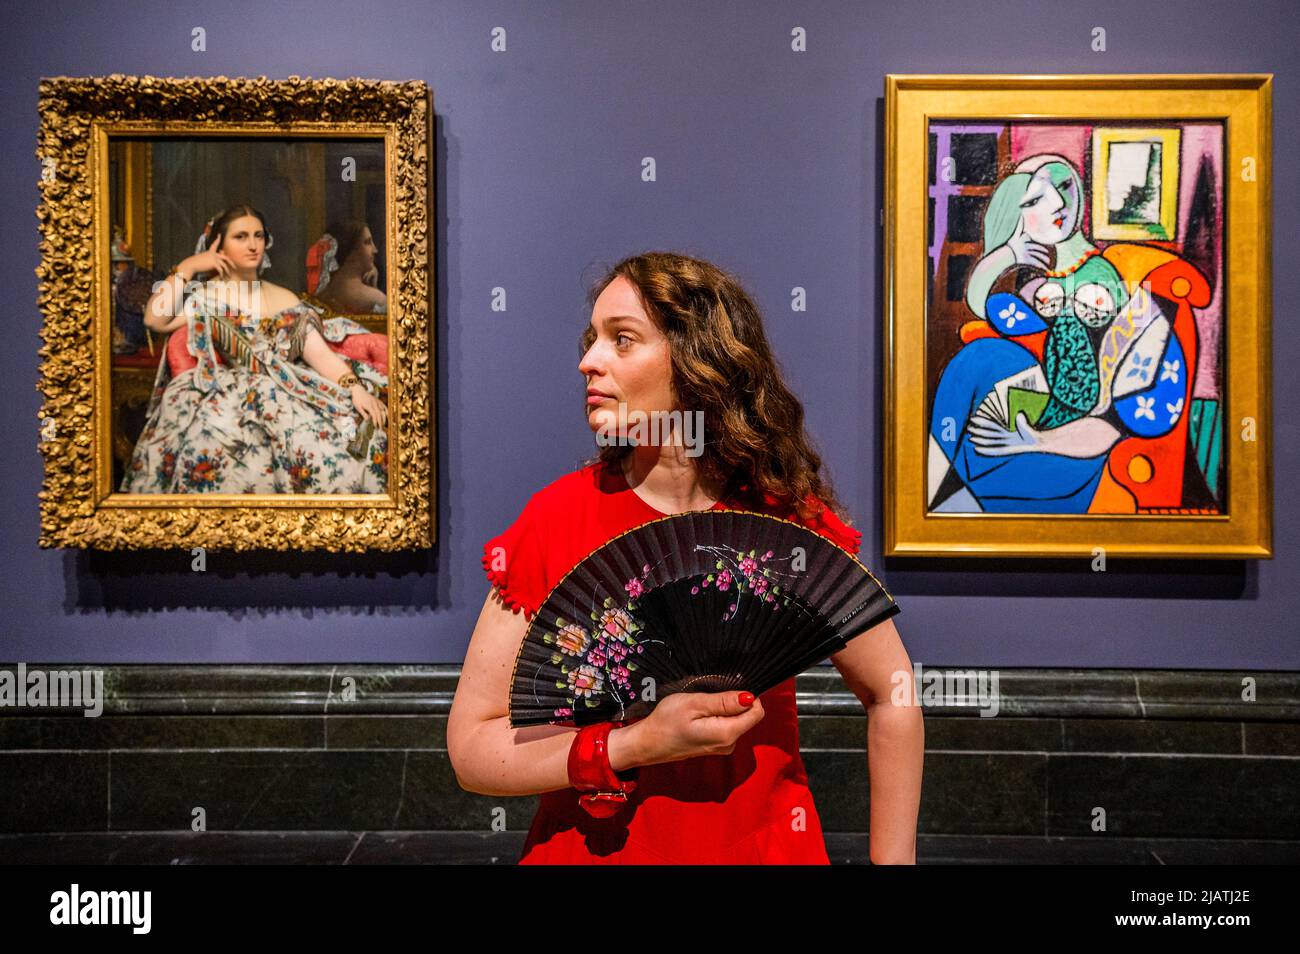 London, UK. 1st June, 2022. For the first time, Picasso's ‘Woman with a Book' (1932) from the Norton Simon Museum, California, is brought together with the painting that inspired it, ‘Madame Moitessier' (1856) by Jean-Auguste-Dominique Ingres, at the National Gallery. Credit: Guy Bell/Alamy Live News Stock Photo